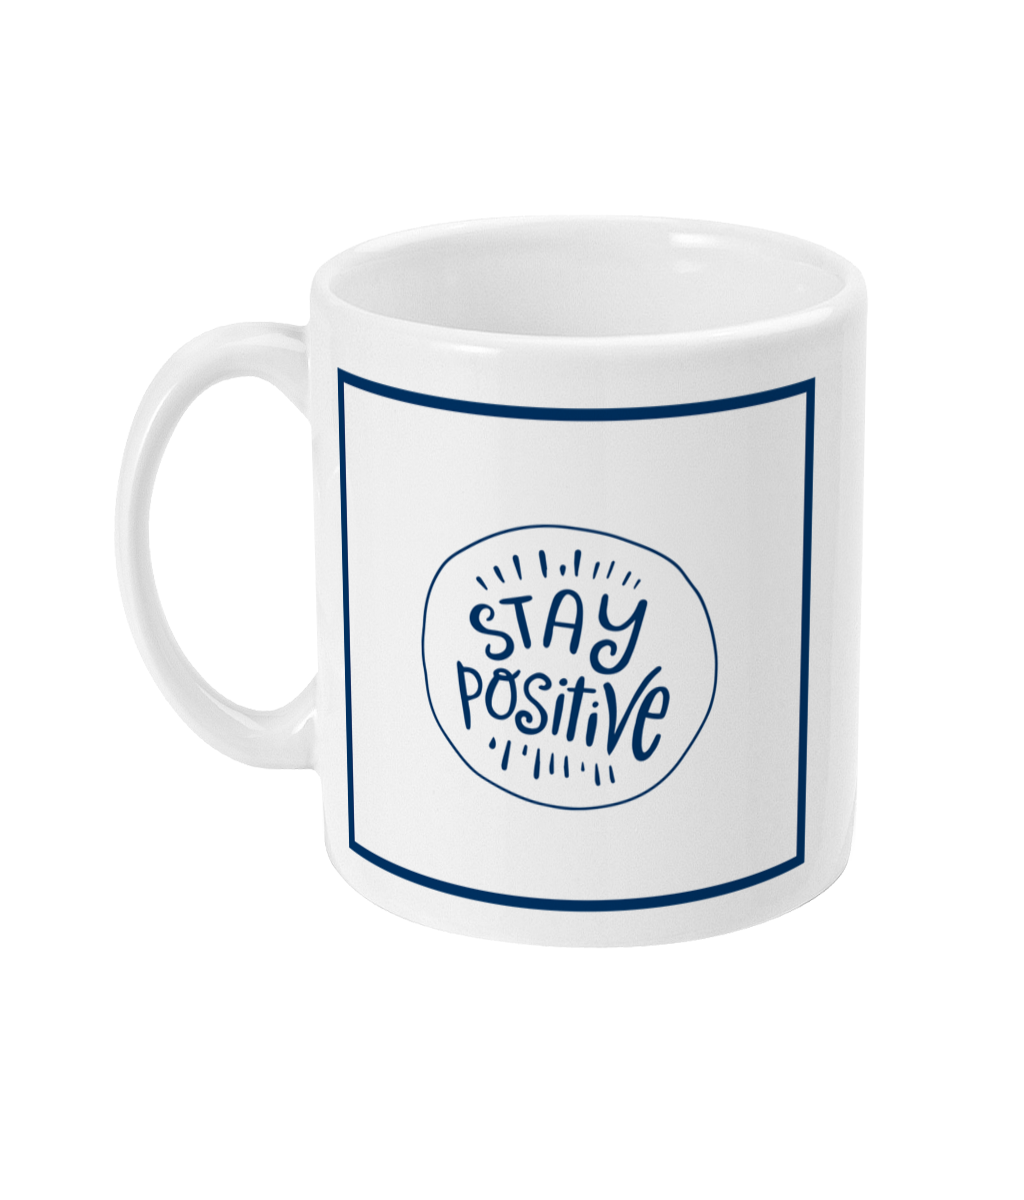 mug with stay positive logo printed on it